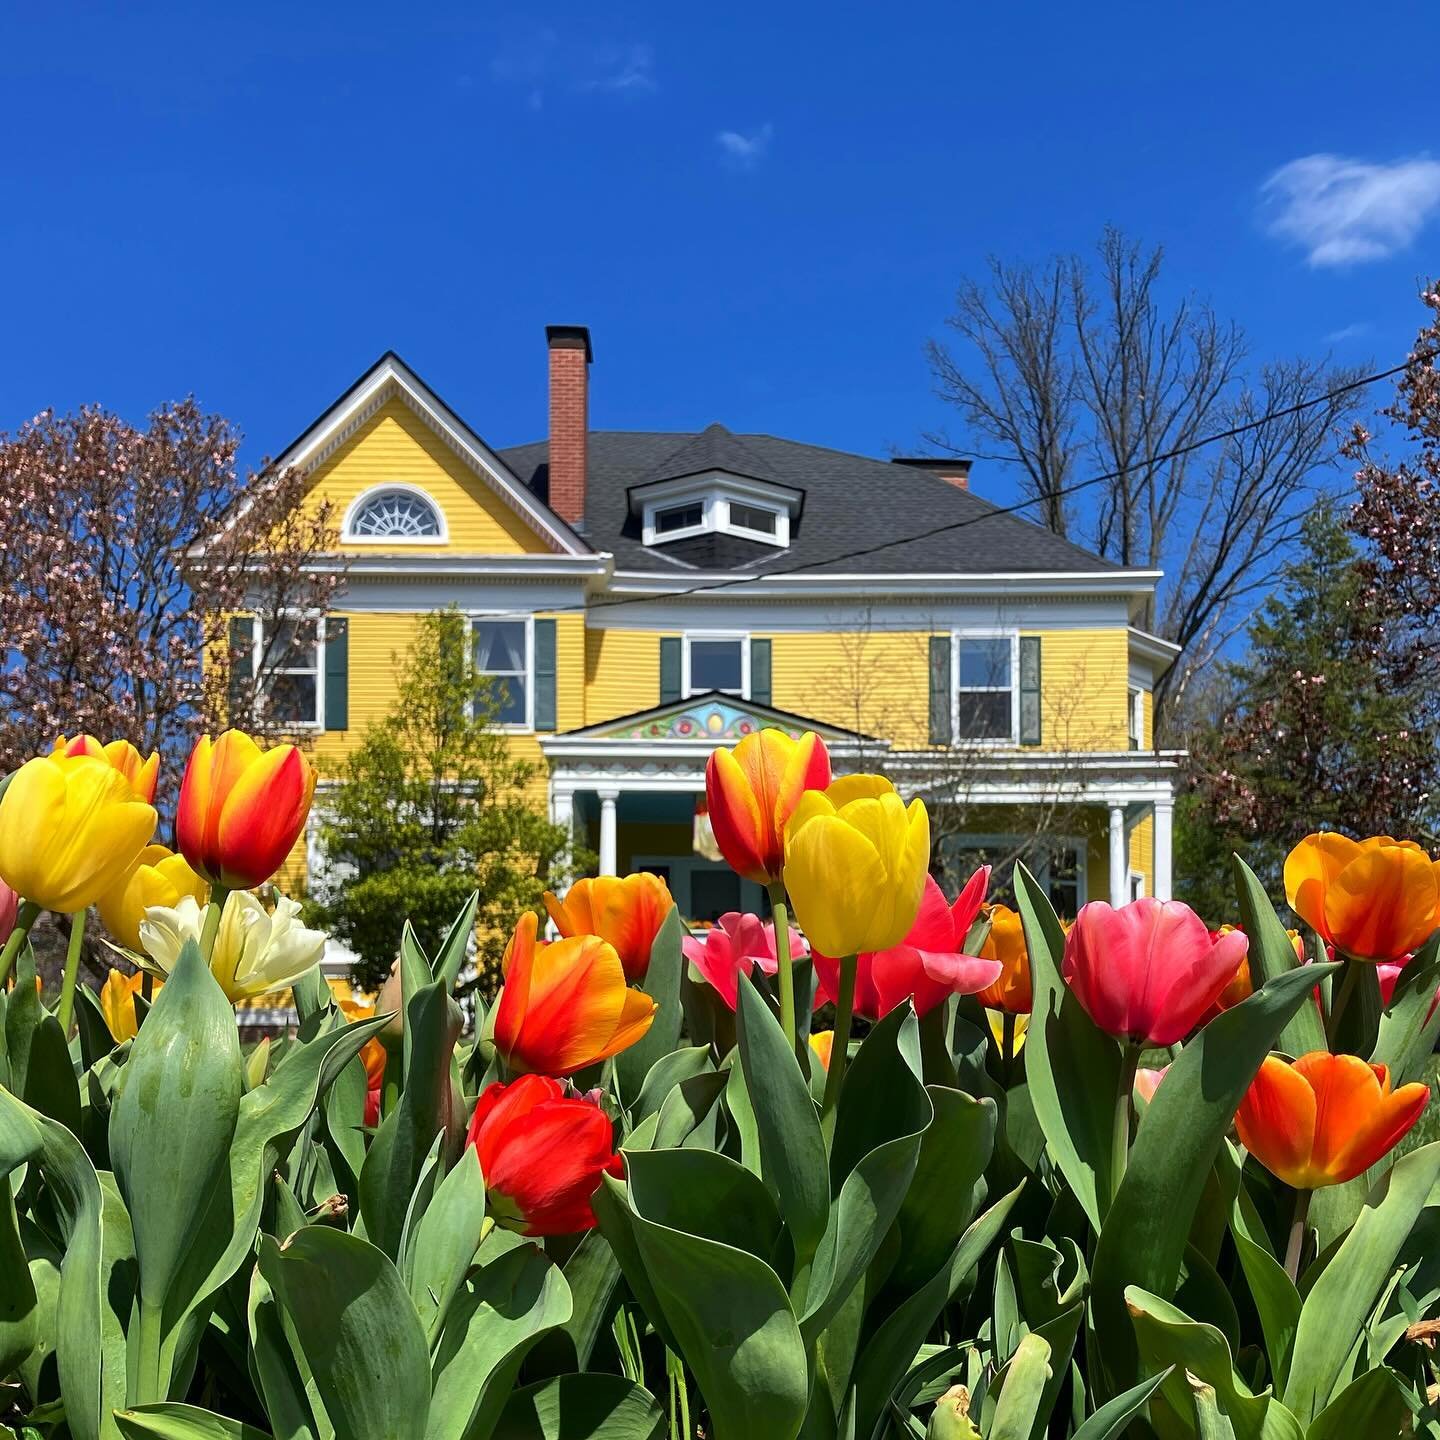 I&rsquo;m proud to be a presenting sponsor of the upcoming Clifton Home &amp; Garden Tour! You probably already know that Clifton is my stomping ground, so this event is close to my heart (and my home).

In keeping with neighborhood tradition, the 20